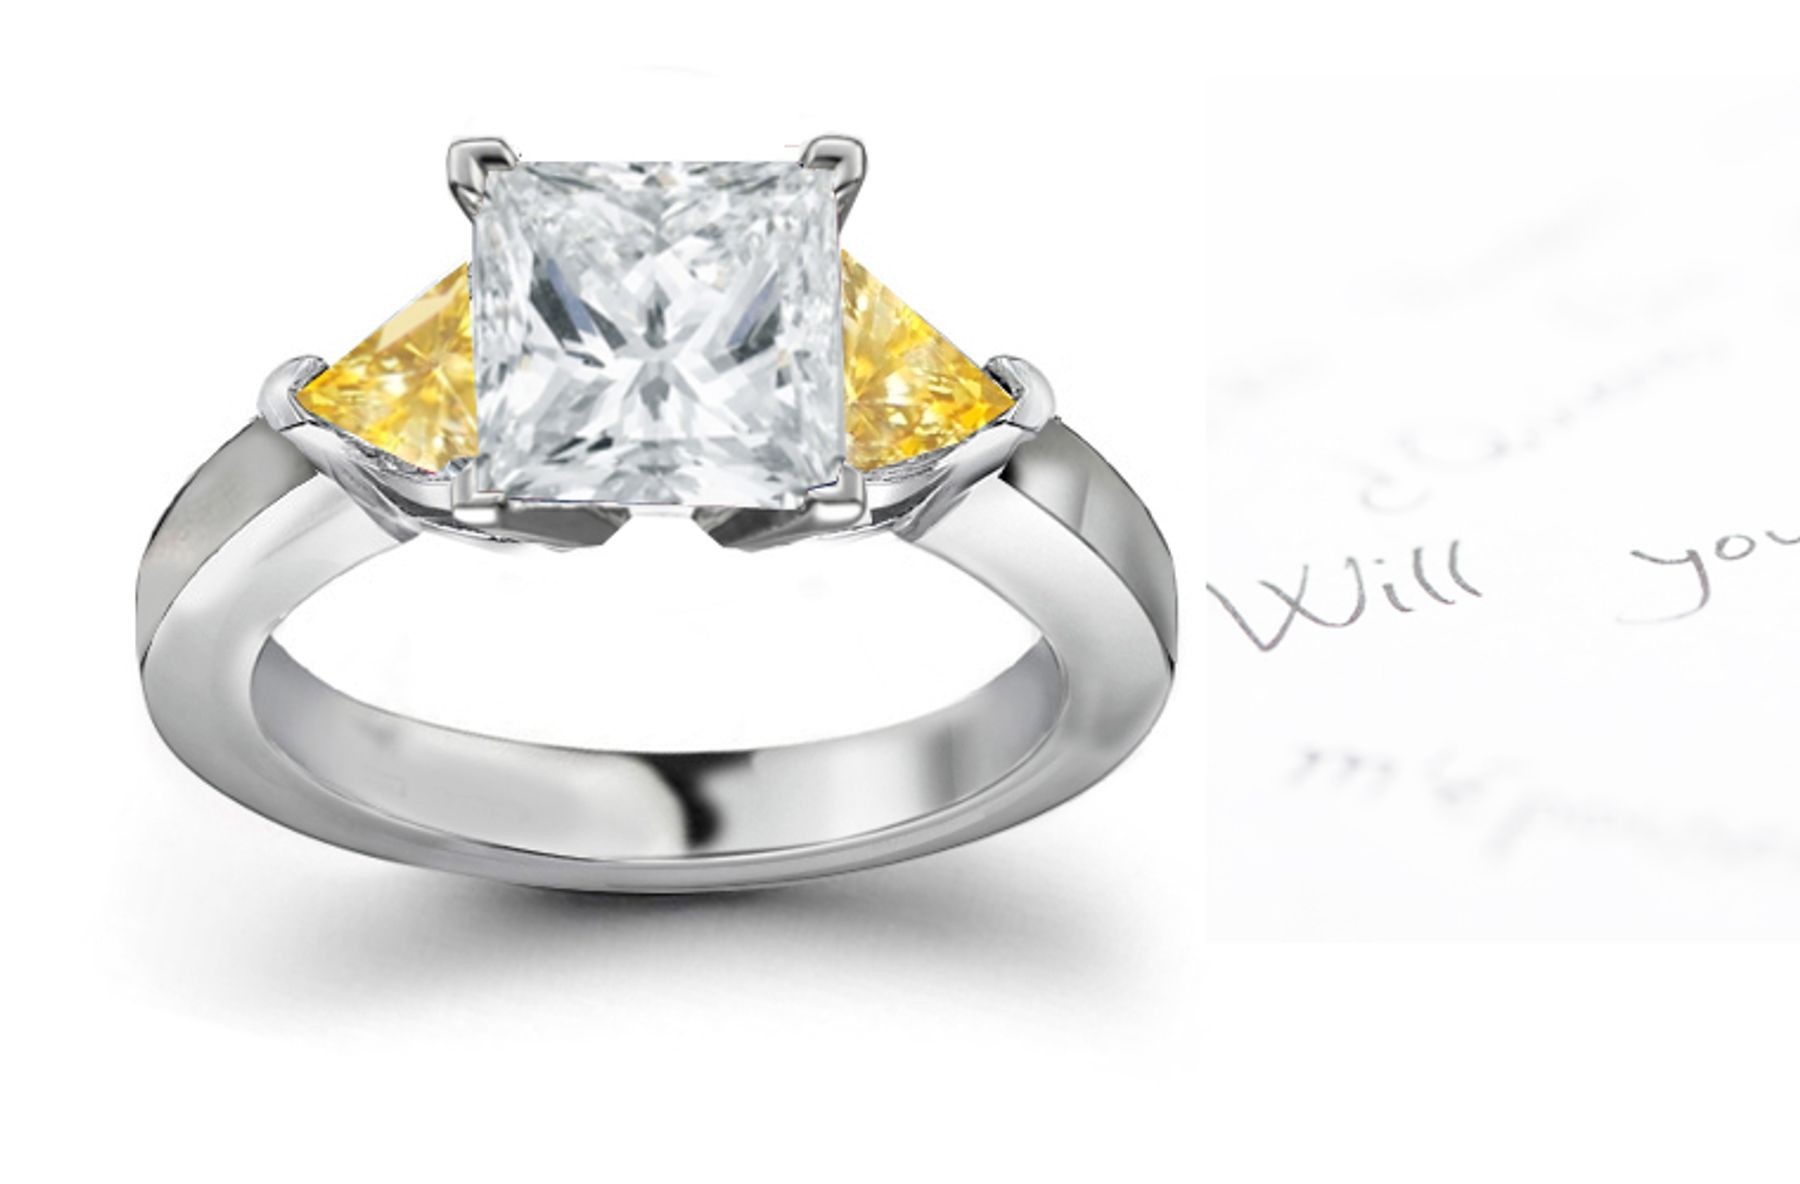 Trillion Yellow Sapphire 3 Stone Engagement Ring with Emerald-Cut Diamonds in 14k White Gold (5x3 mm, 3x3 mm)